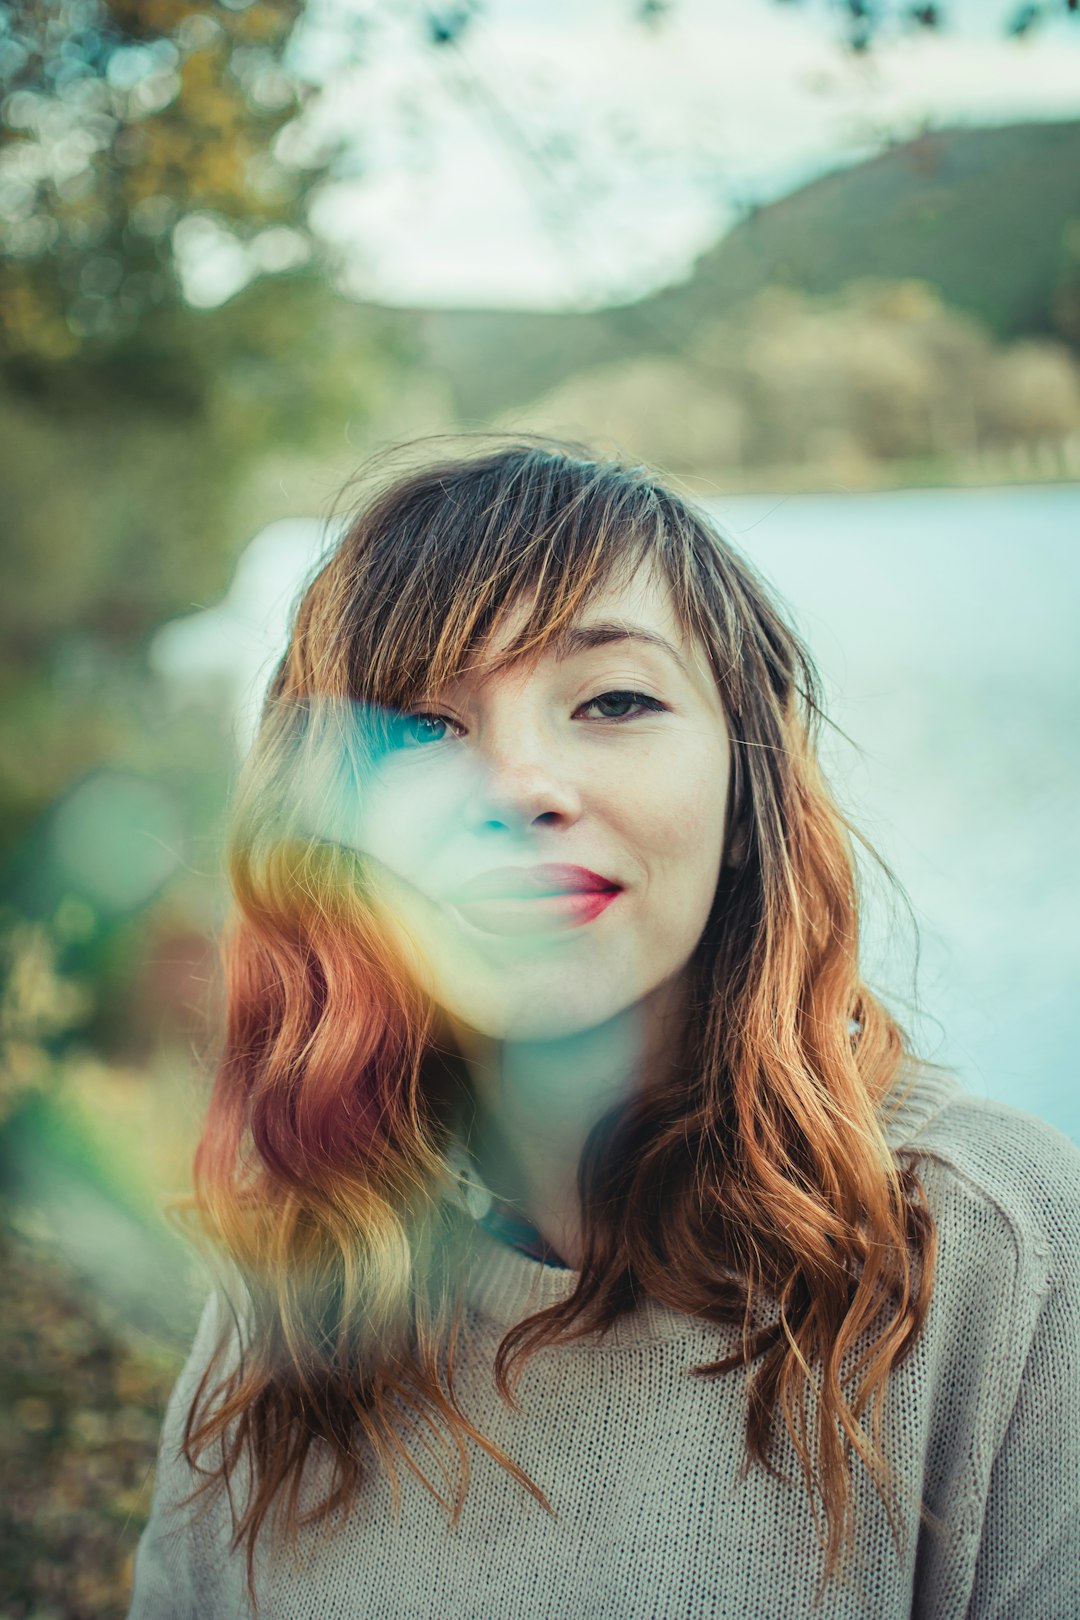 girl in gray sweater with rainbow on her face